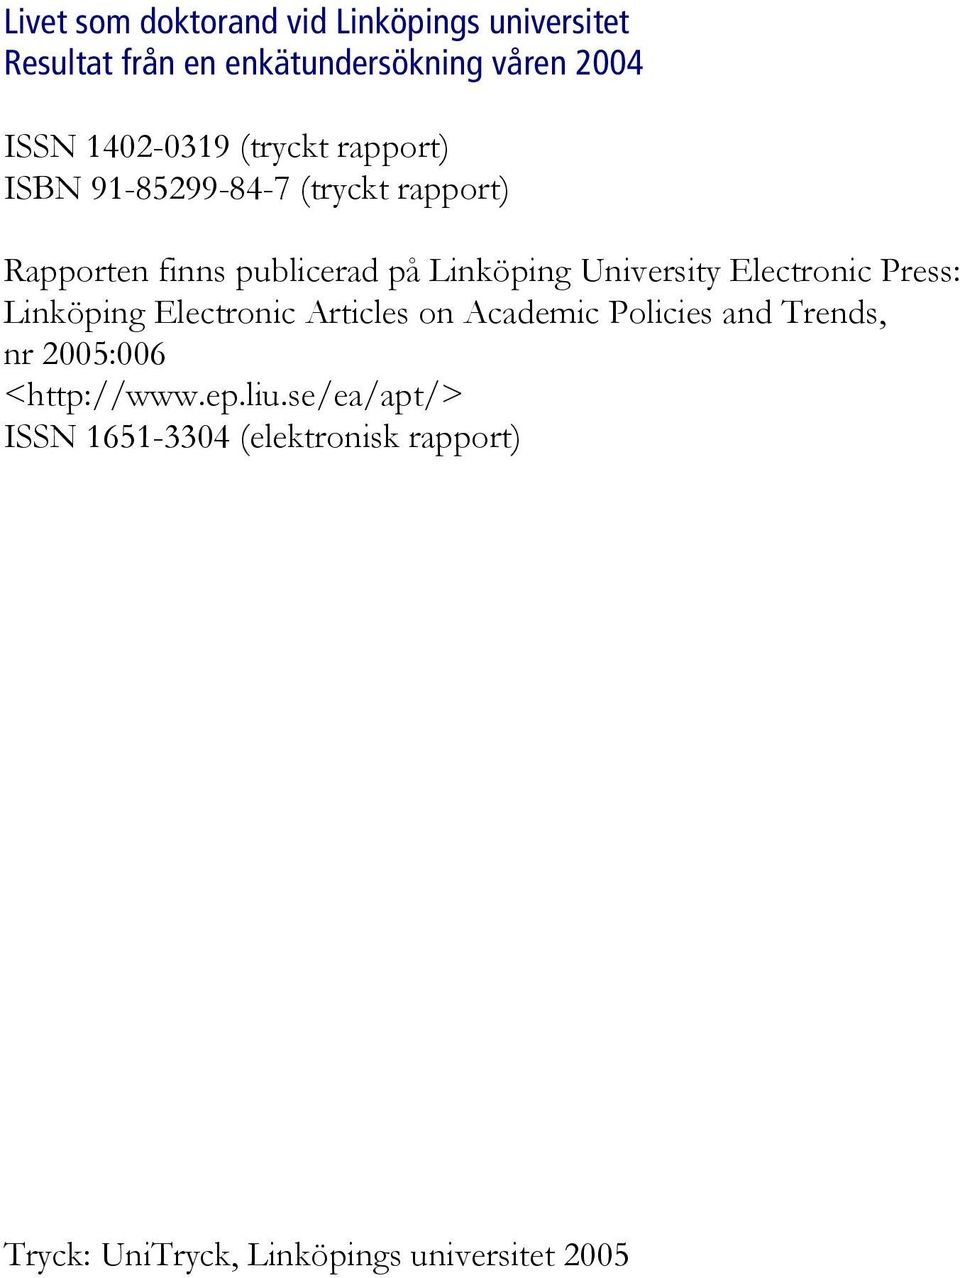 University Electronic Press: Linköping Electronic Articles on Academic Policies and Trends, nr 2005:006